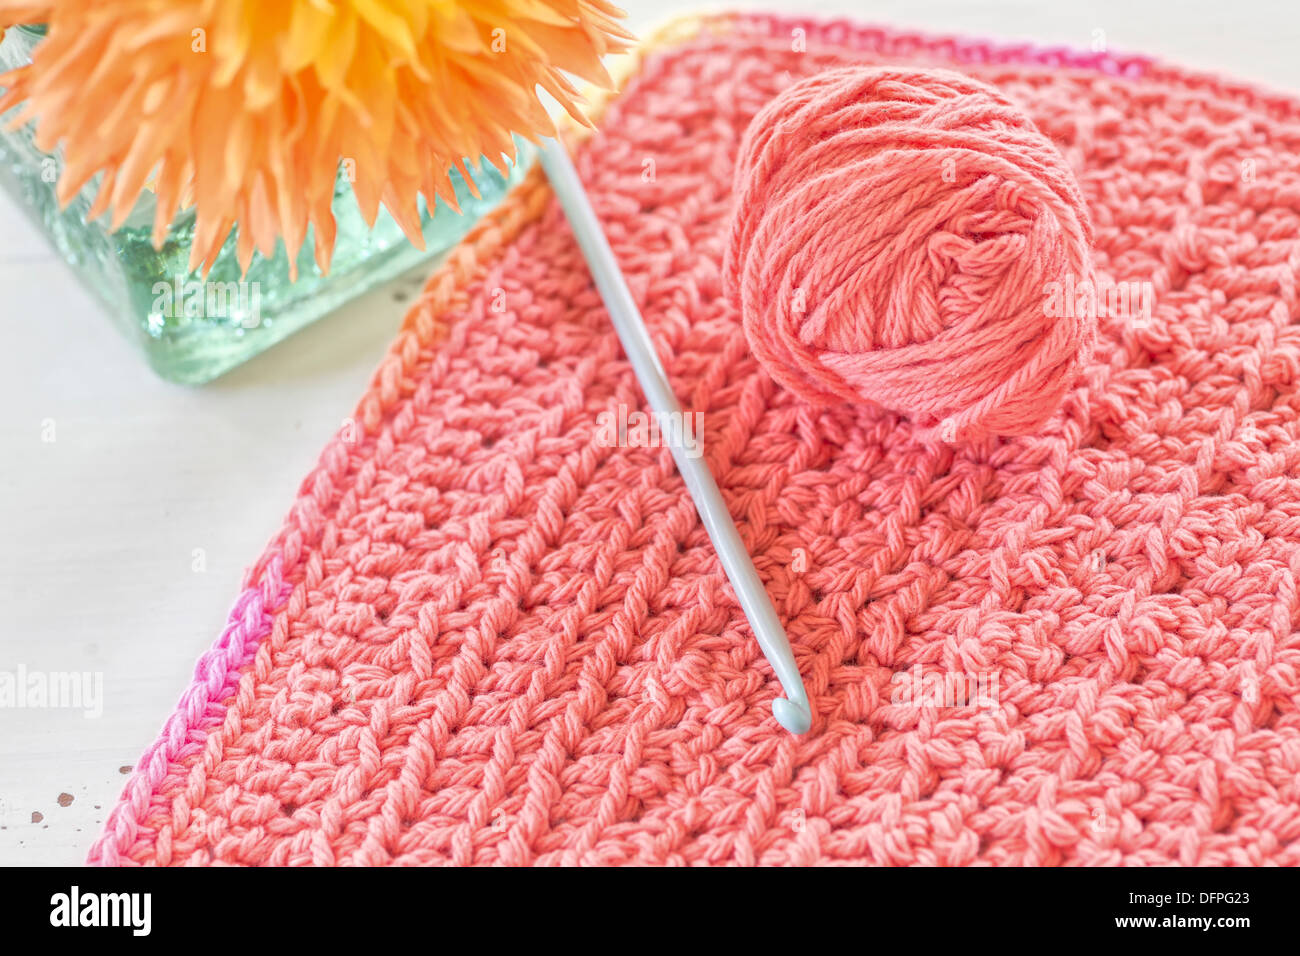 A crocheted dishcloth with crotchet hook and ball of yarn sitting alongside a vase of flowers. Stock Photo